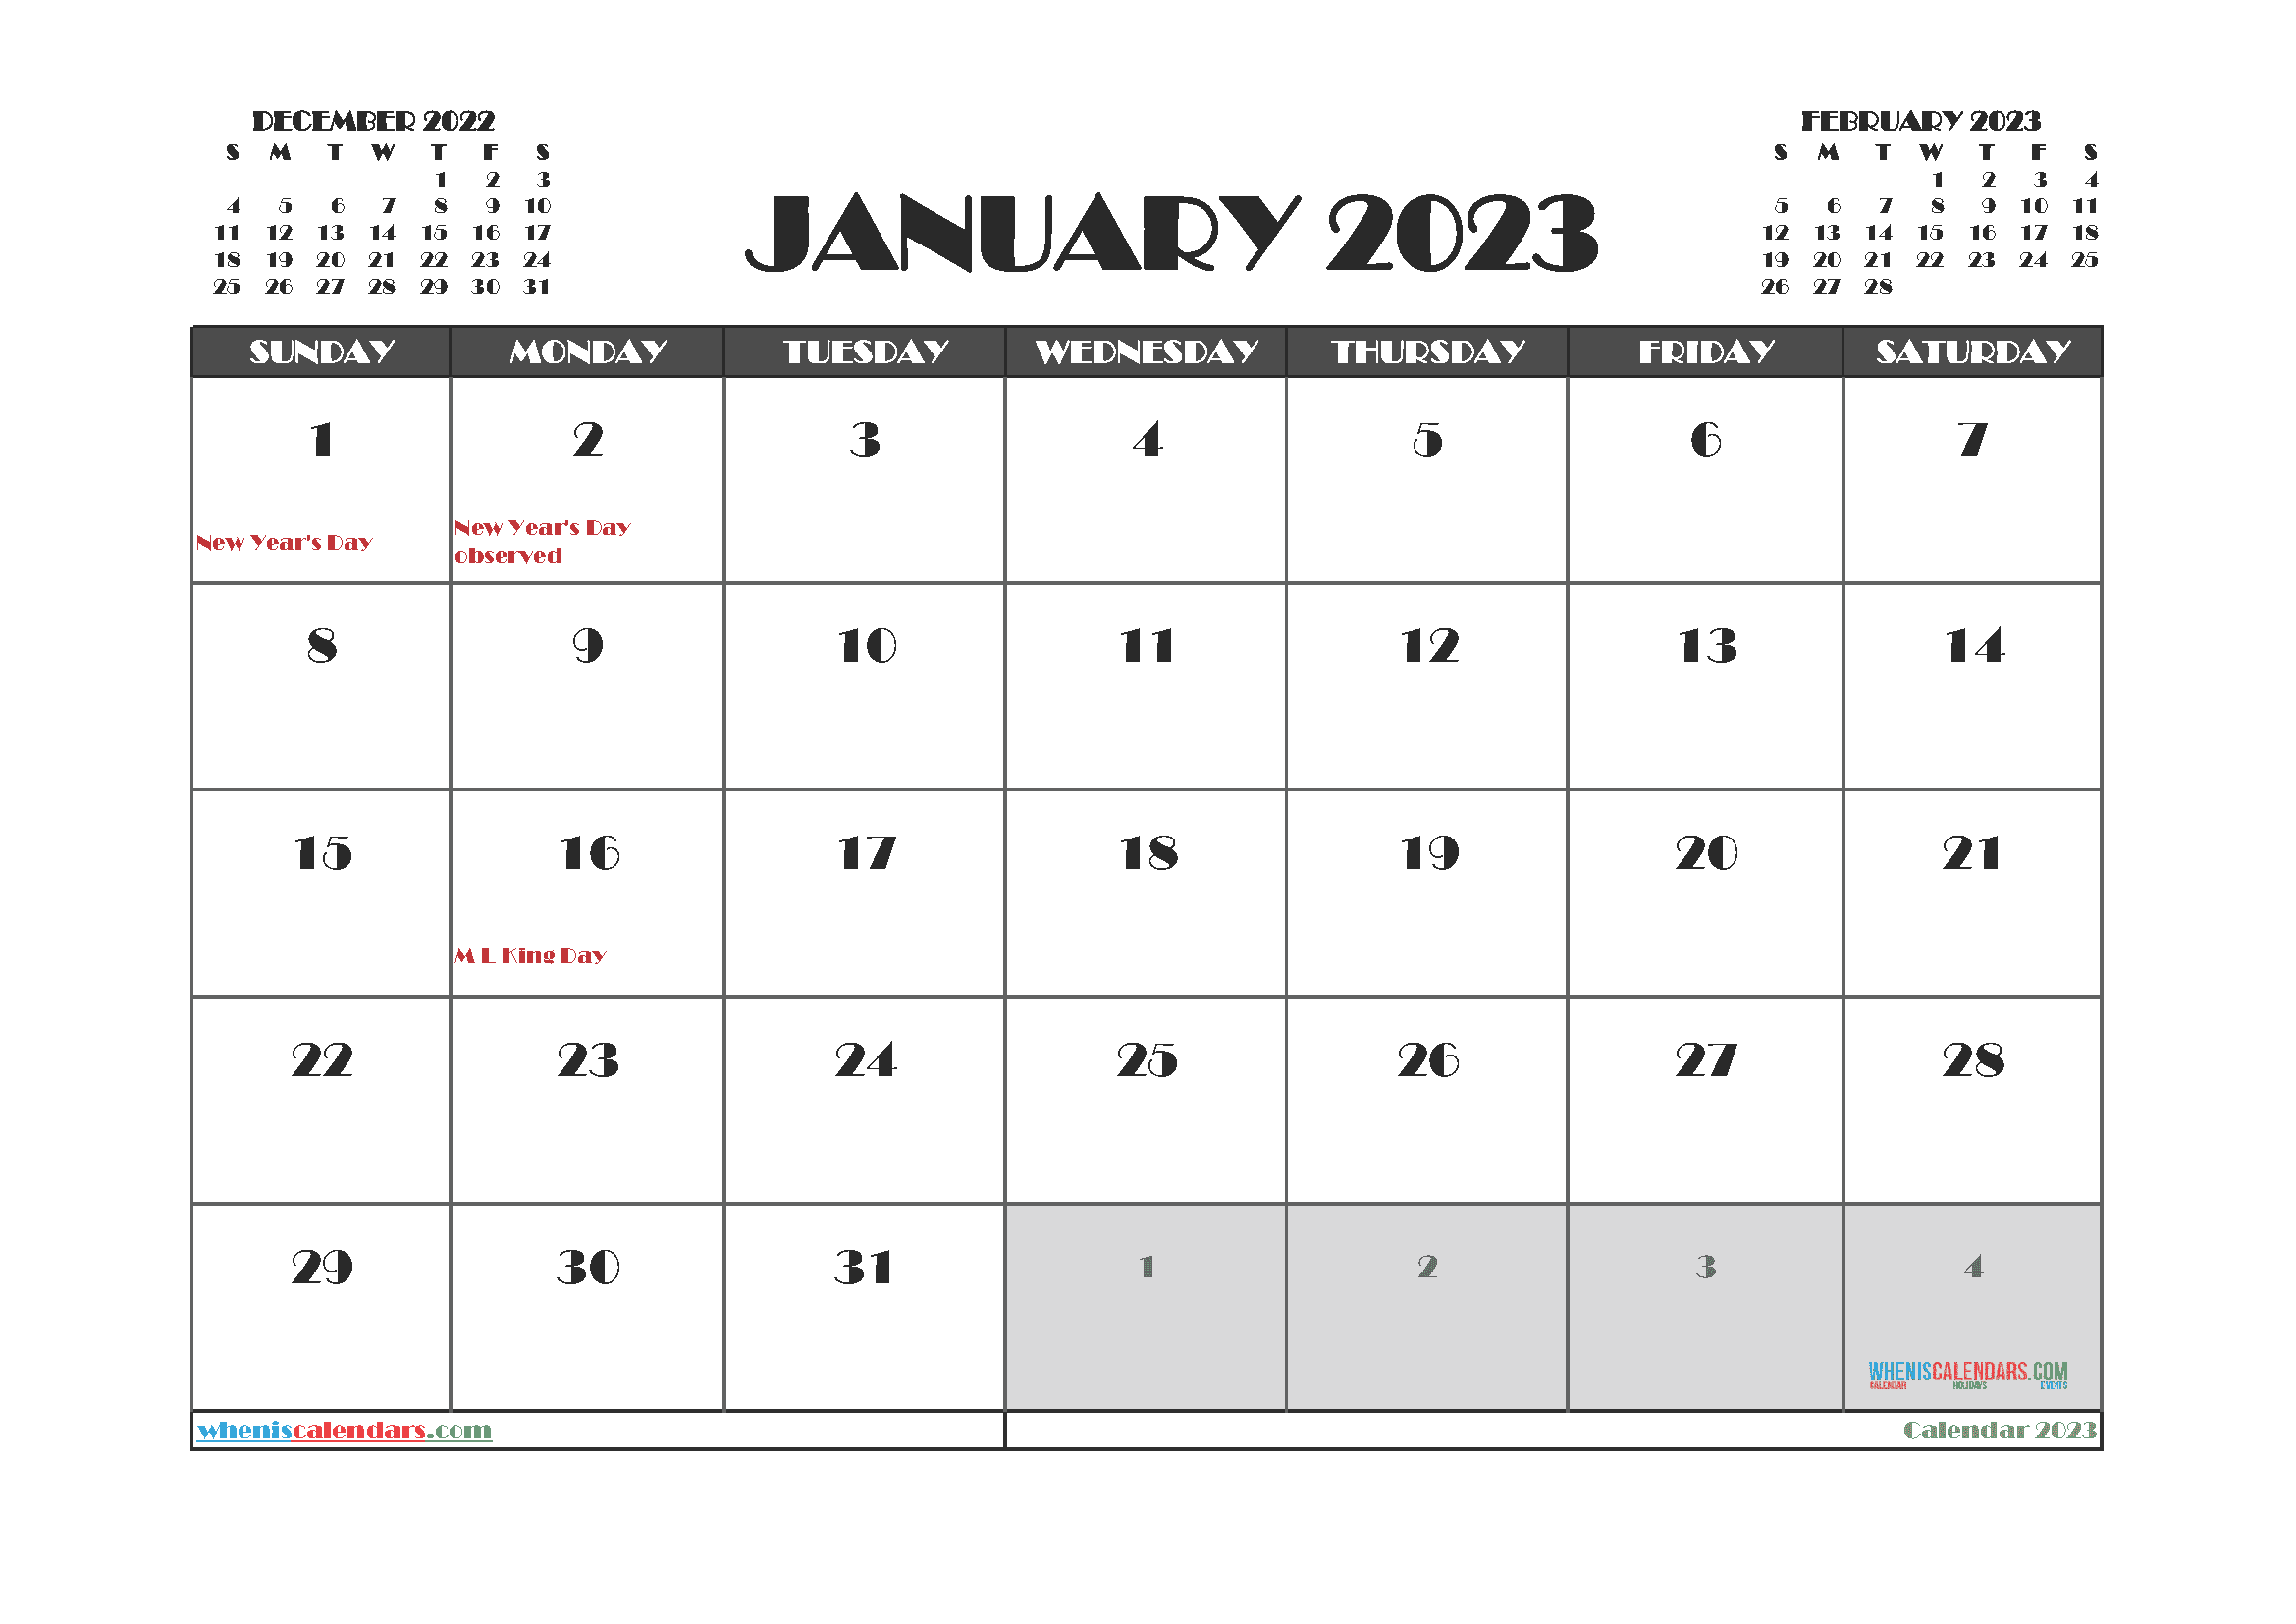 January 2023 Calendar with Holidays Free Printable PDF in Landscape